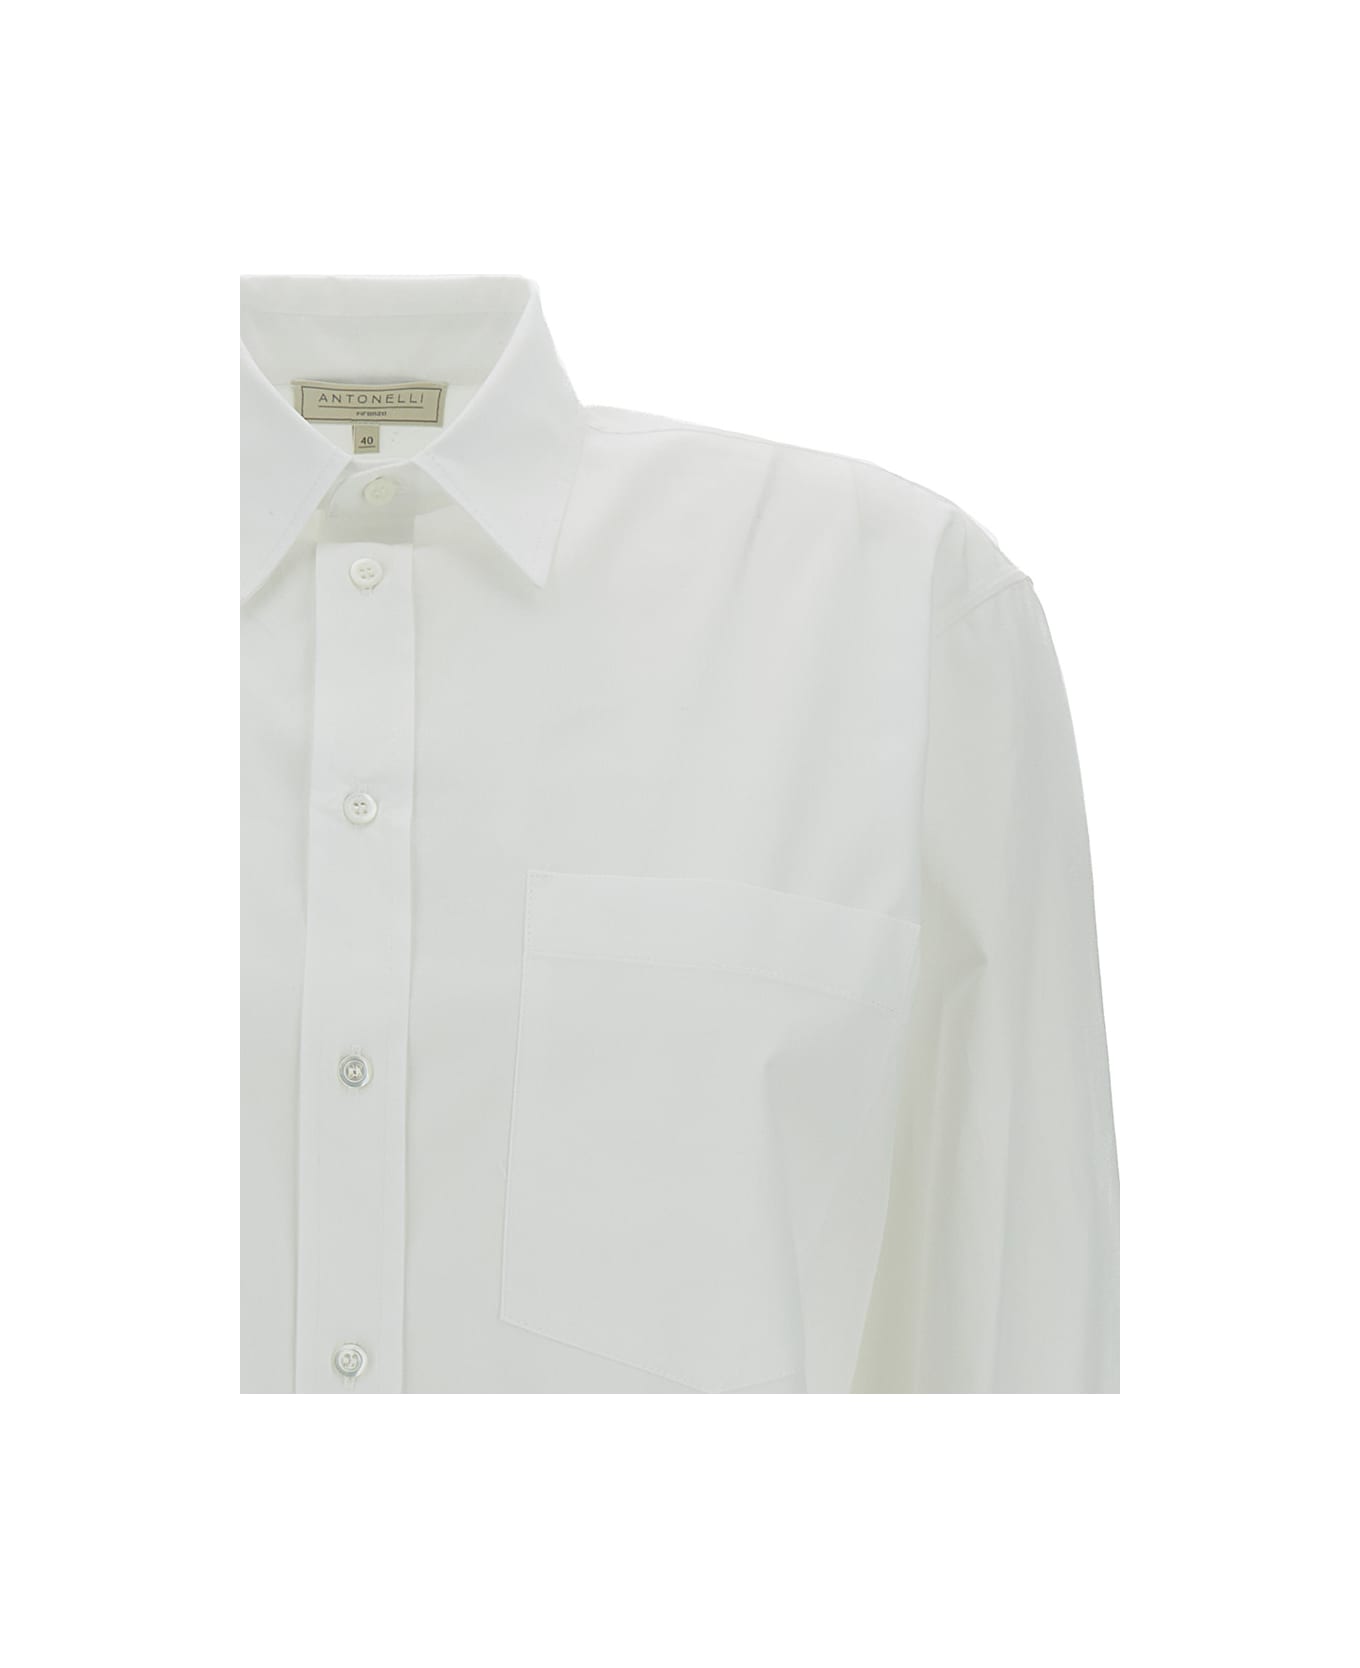 Antonelli White Shirt With Patch Pocket In Cotton Woman - White シャツ